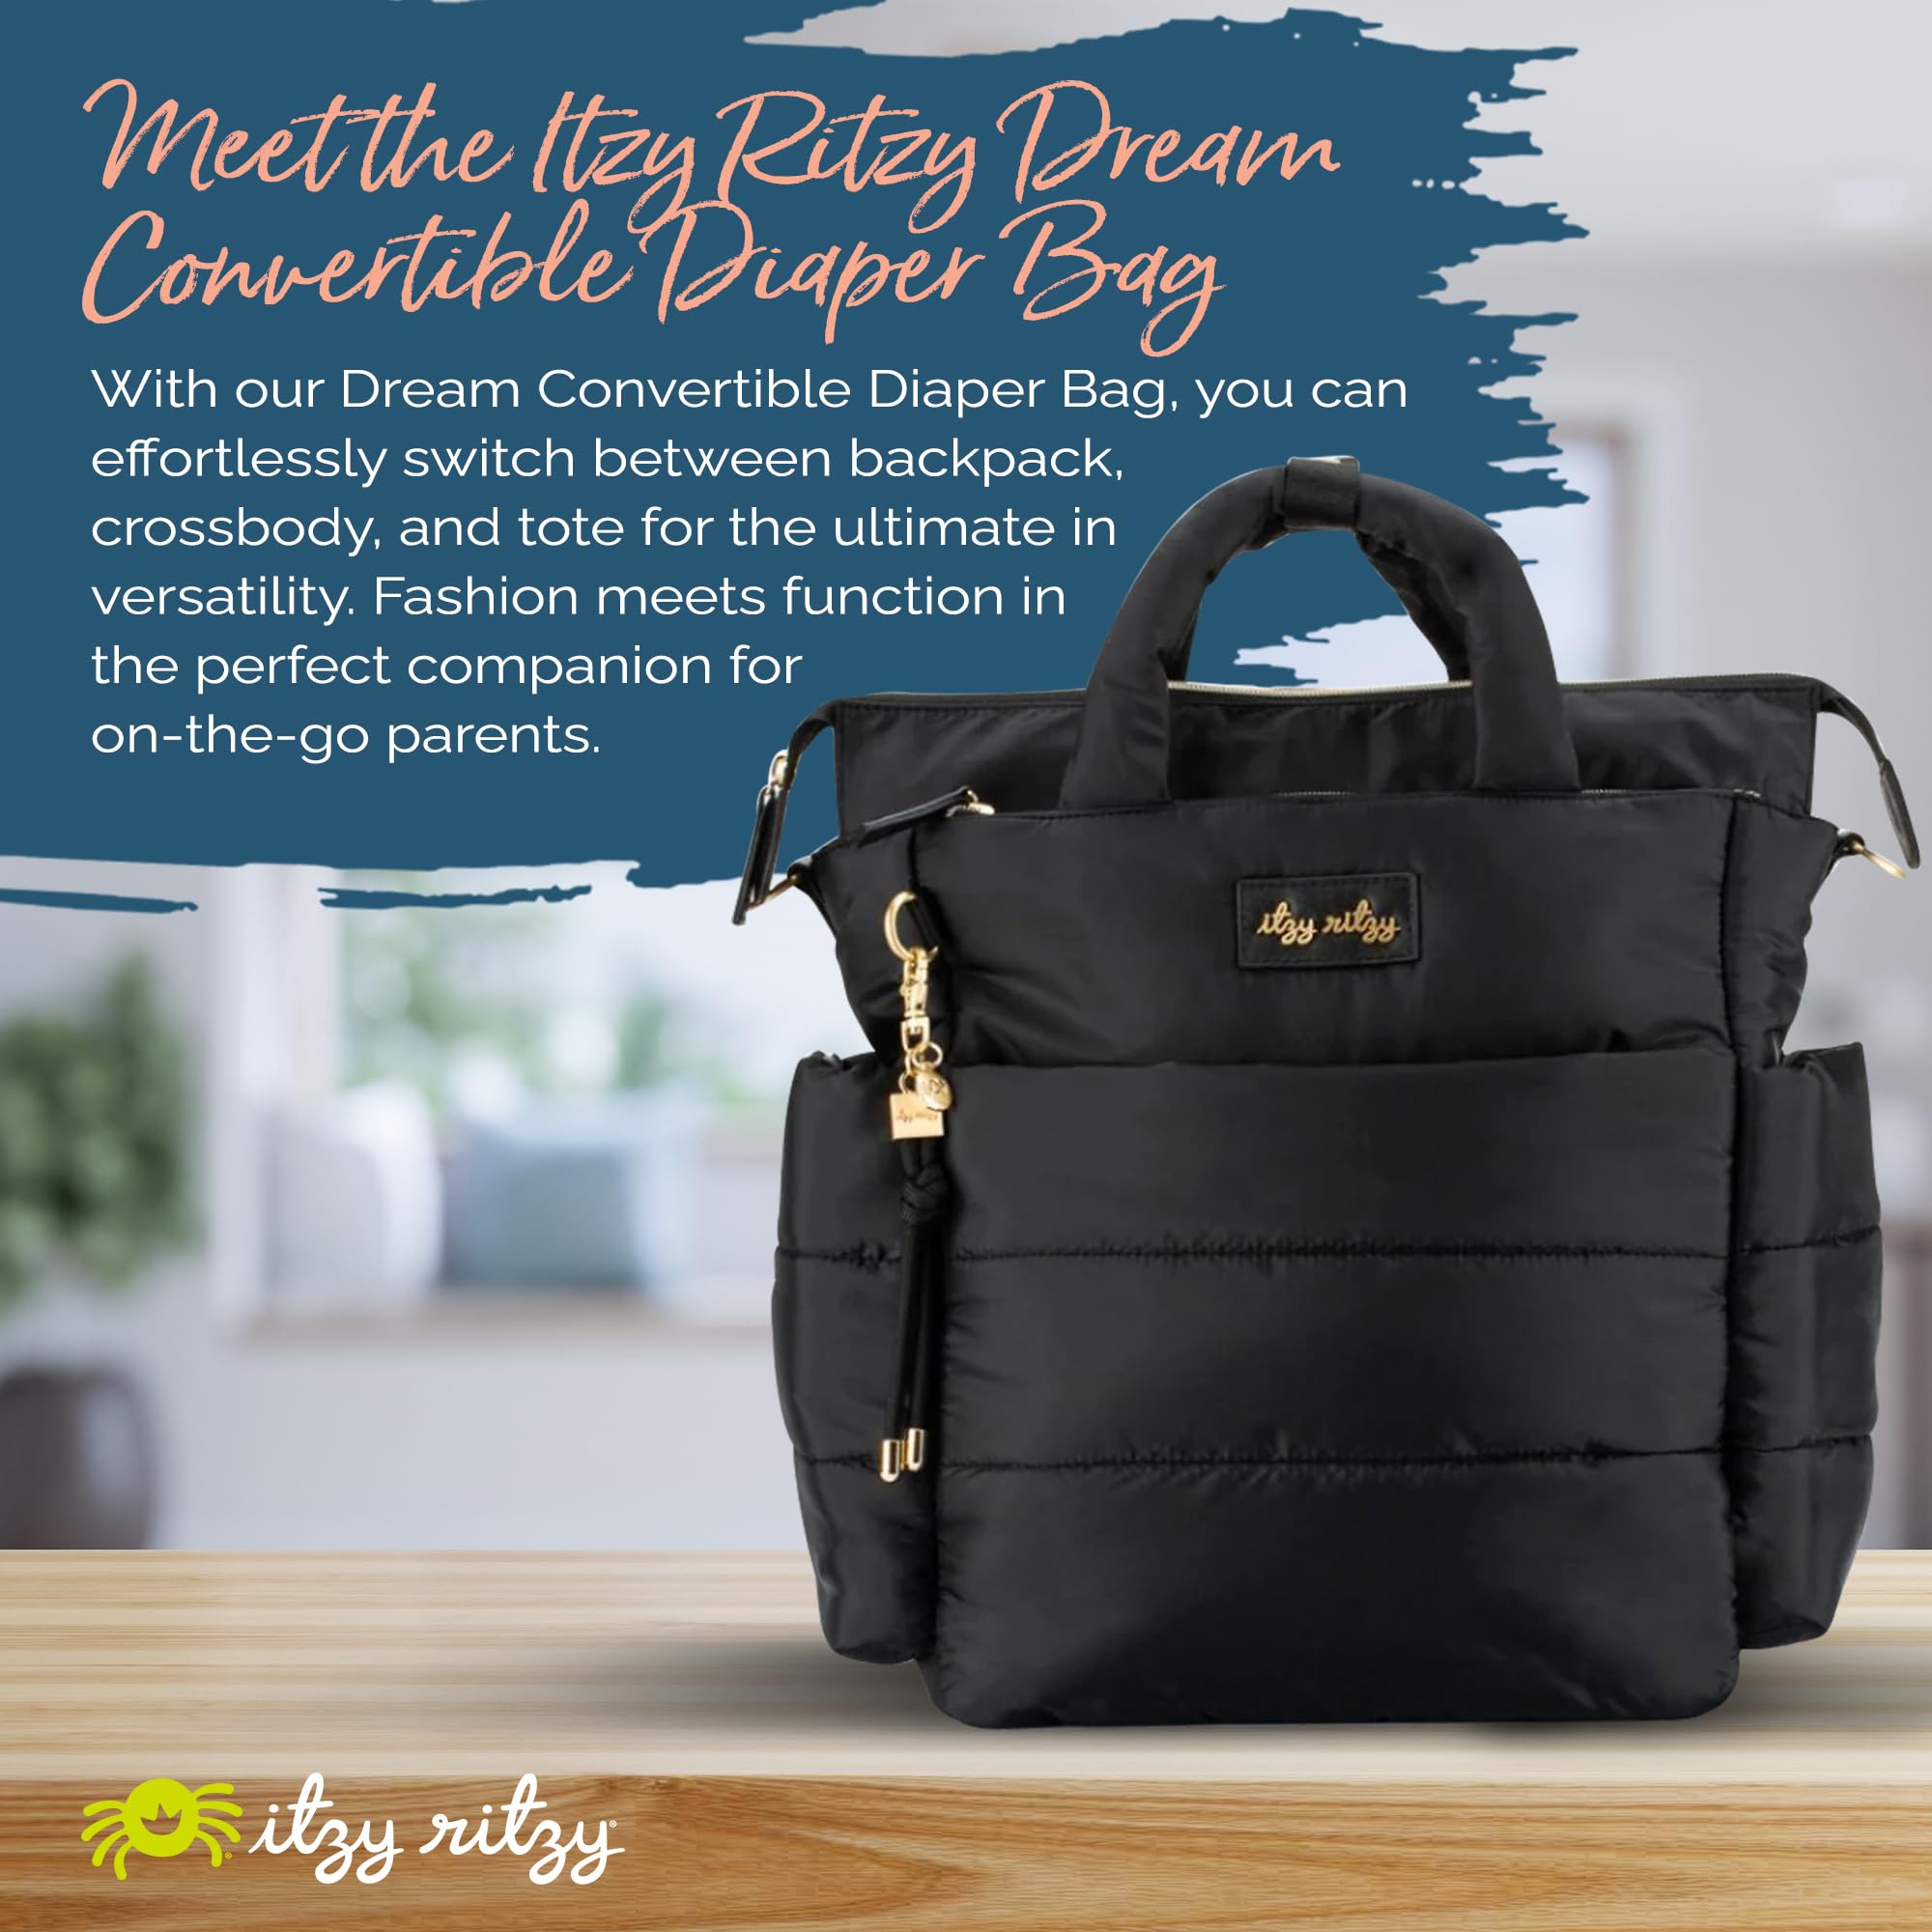 Itzy Ritzy Dream Convertible Diaper Bag Tote Backpack - Baby Diaper Bag - 14 Pockets Including 2 Ins & Dream Weekender Travel Bag - Lightweight Overnight